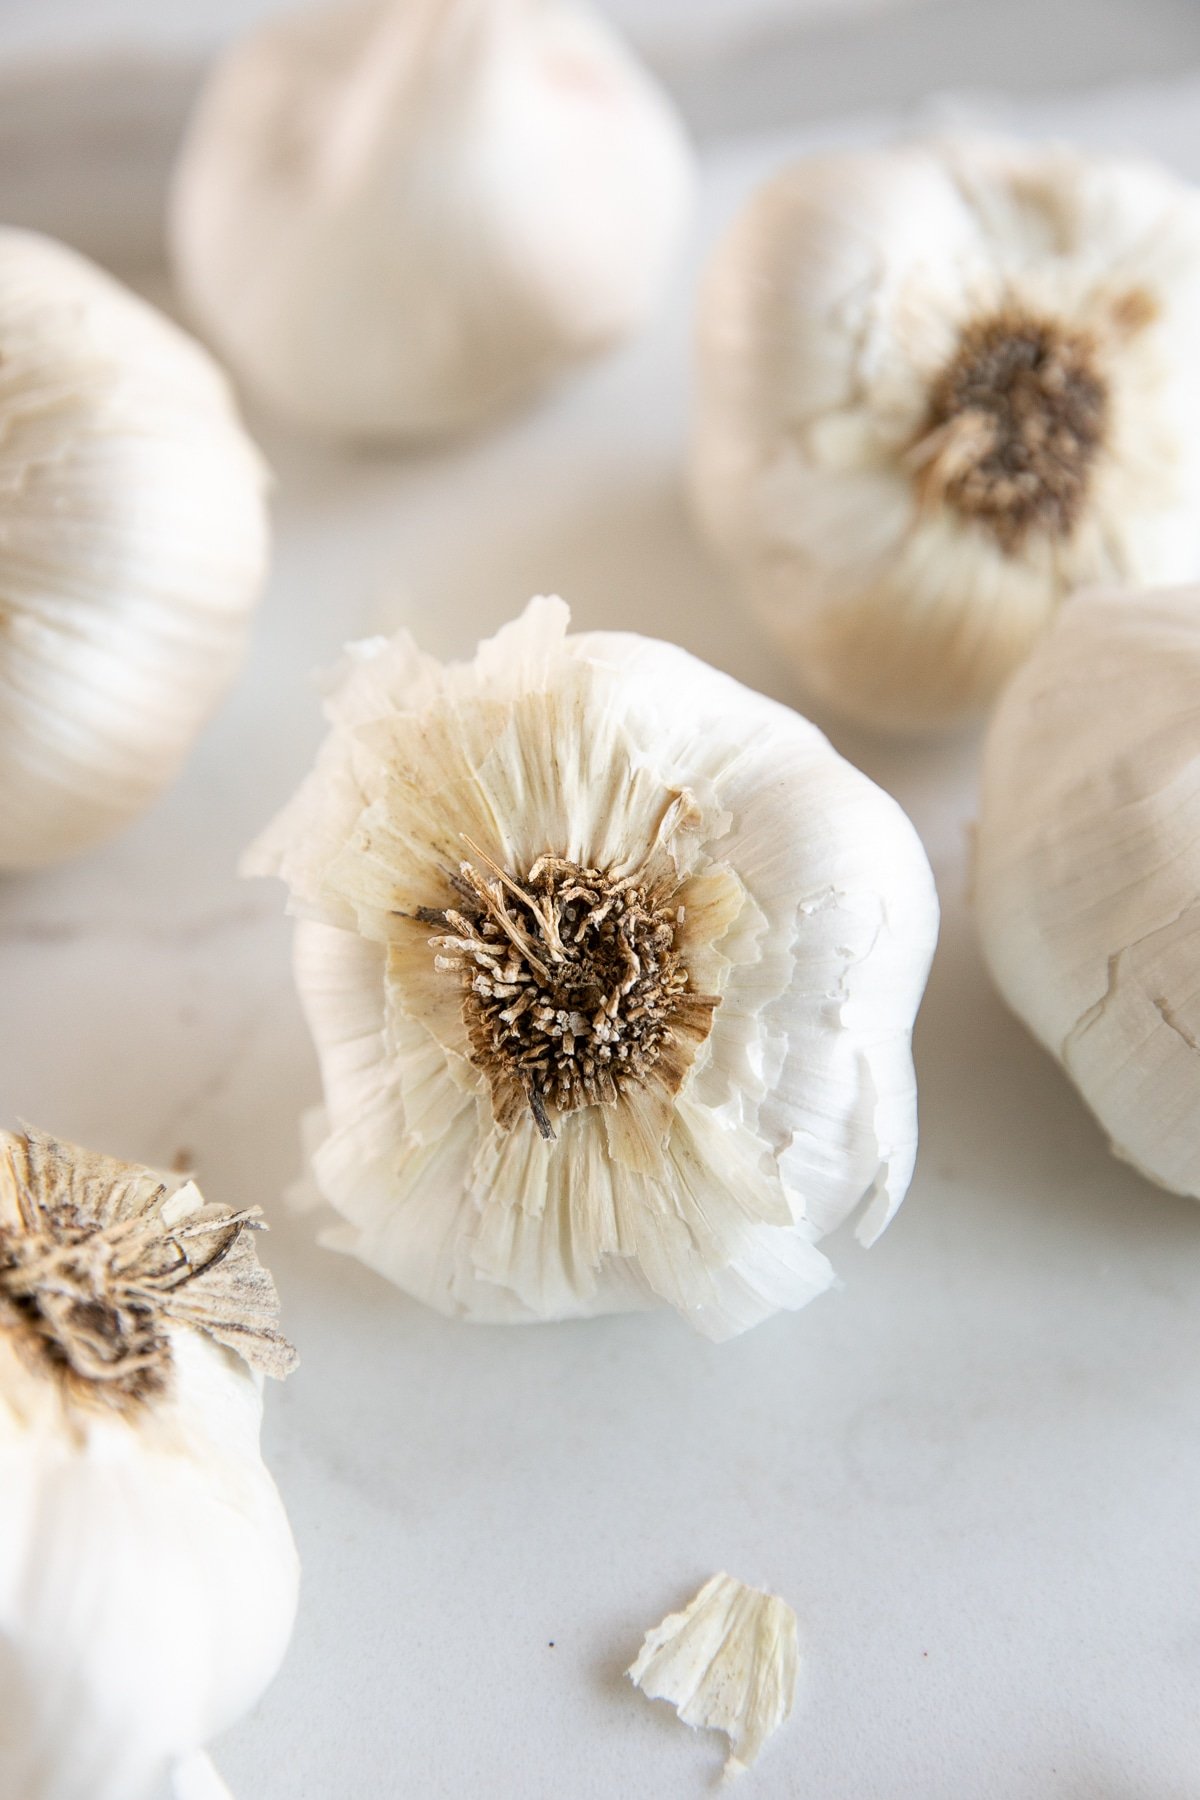 Close up image of one whole garlic bulb surrounded by additional bulbs of garlic in the foreground and background.